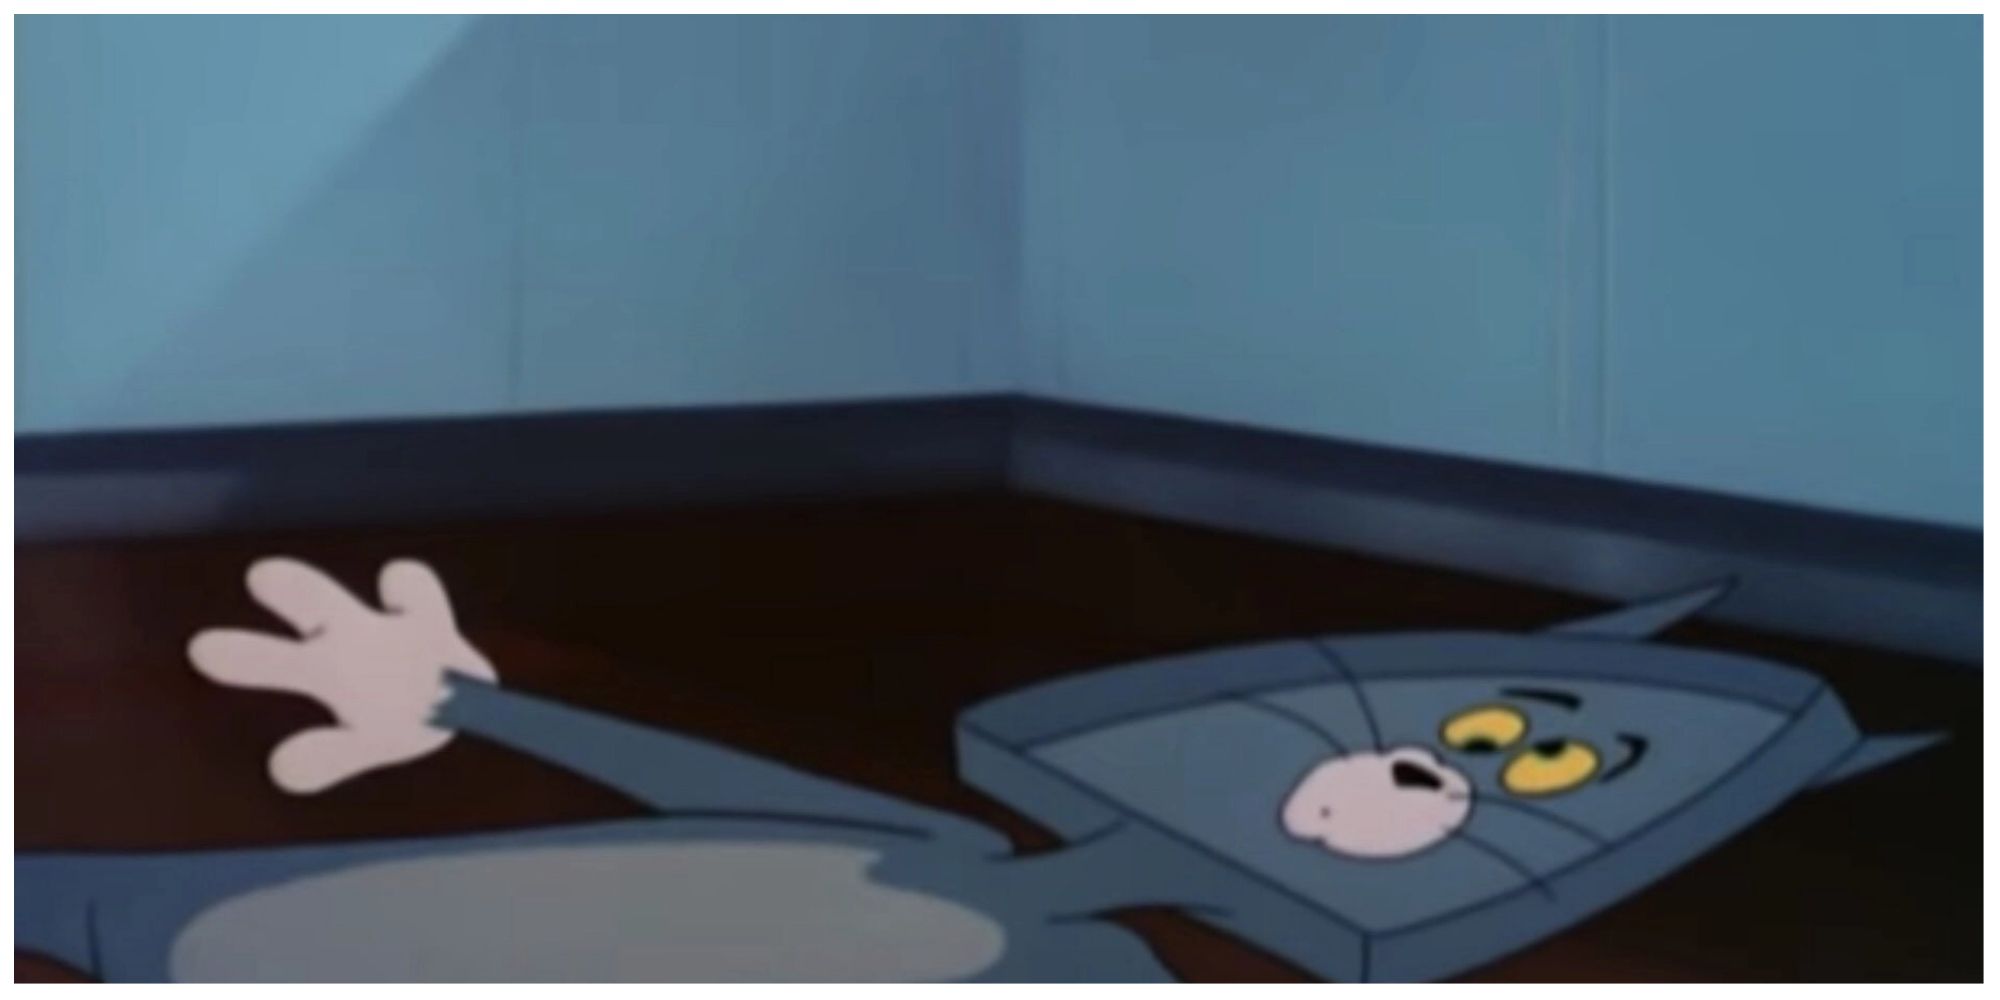 Tom the cat in the Tom and Jerry Episode the missing mouse